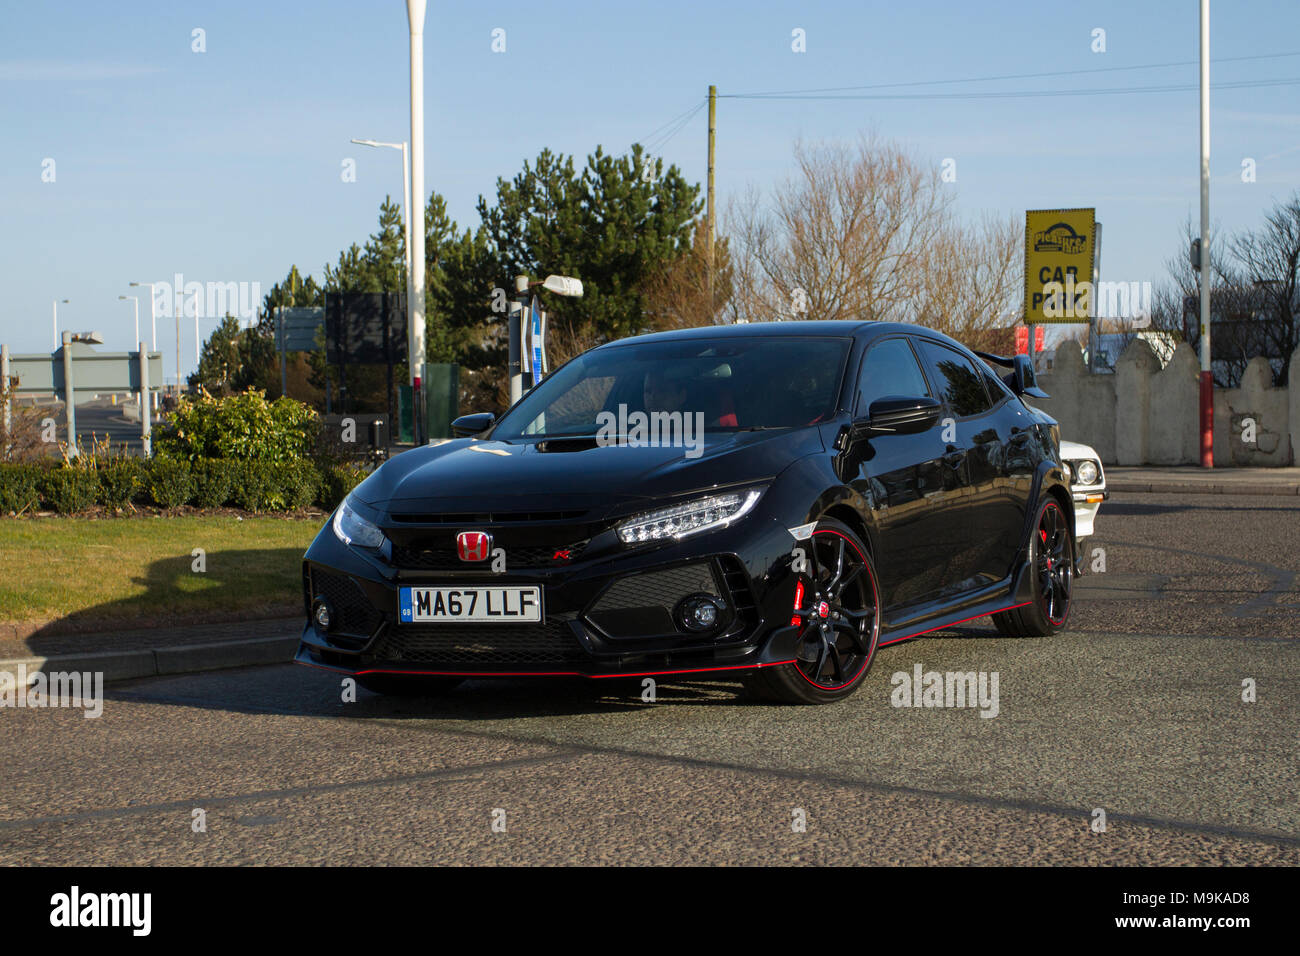 2017 black Honda Civic Gt Type R Vtec 1996cc petrol hatchback at the North-West Supercar event as cars and tourists arrive in the coastal resort on a warm spring day. SuperCars are bumper to bumper on the seafront esplanade a classic & sports car enthusiasts enjoy a motoring day out. Stock Photo